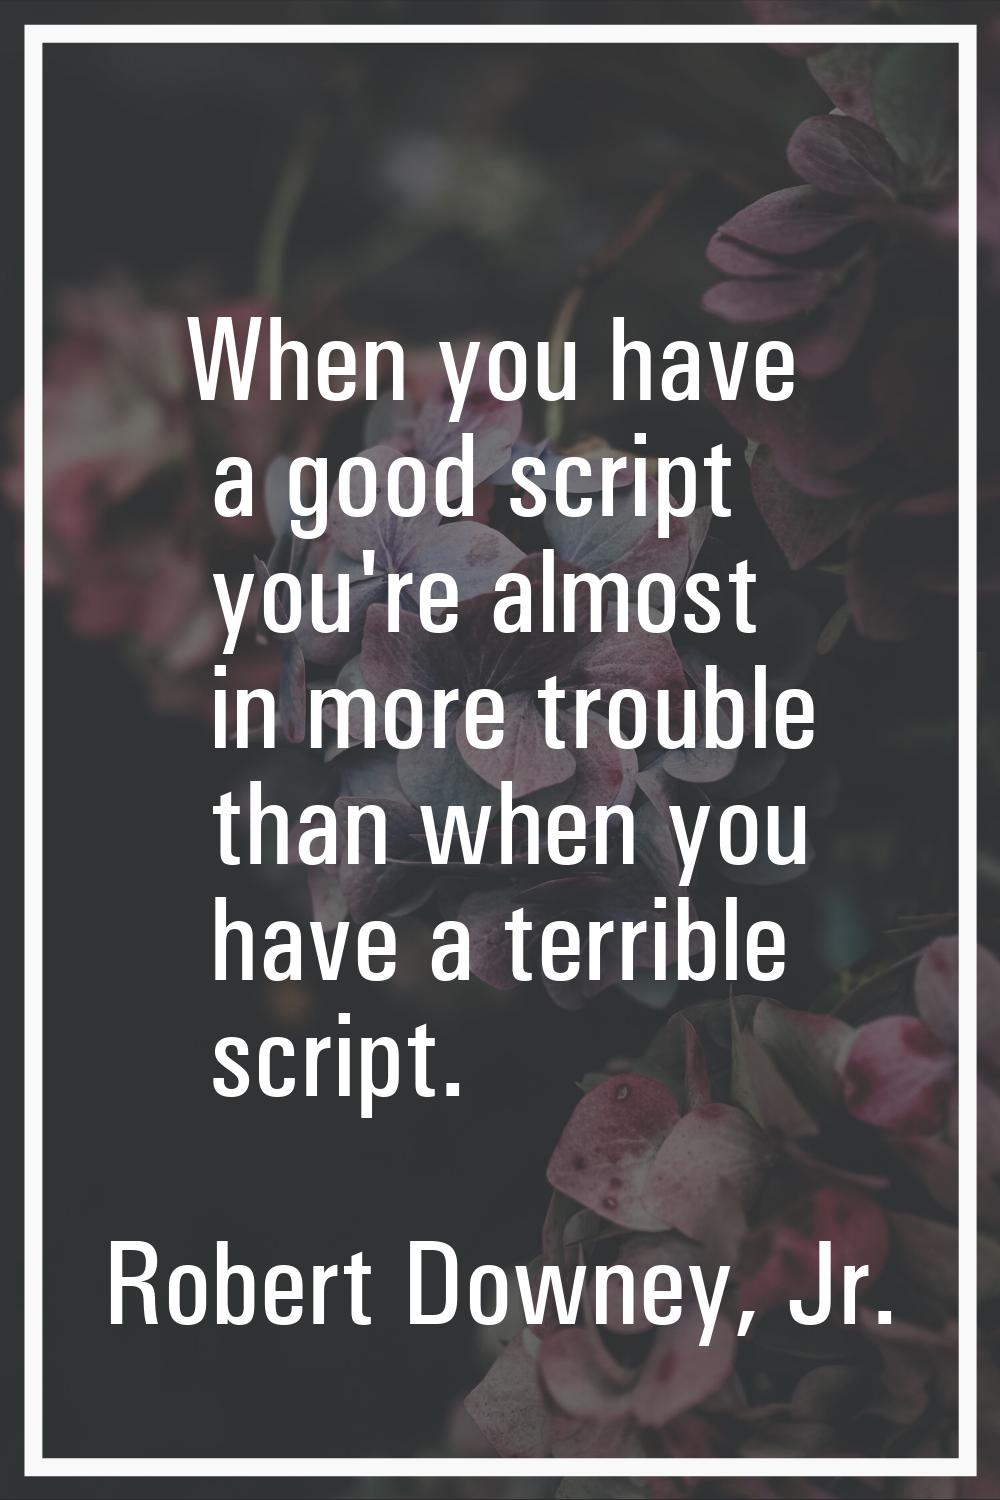 When you have a good script you're almost in more trouble than when you have a terrible script.